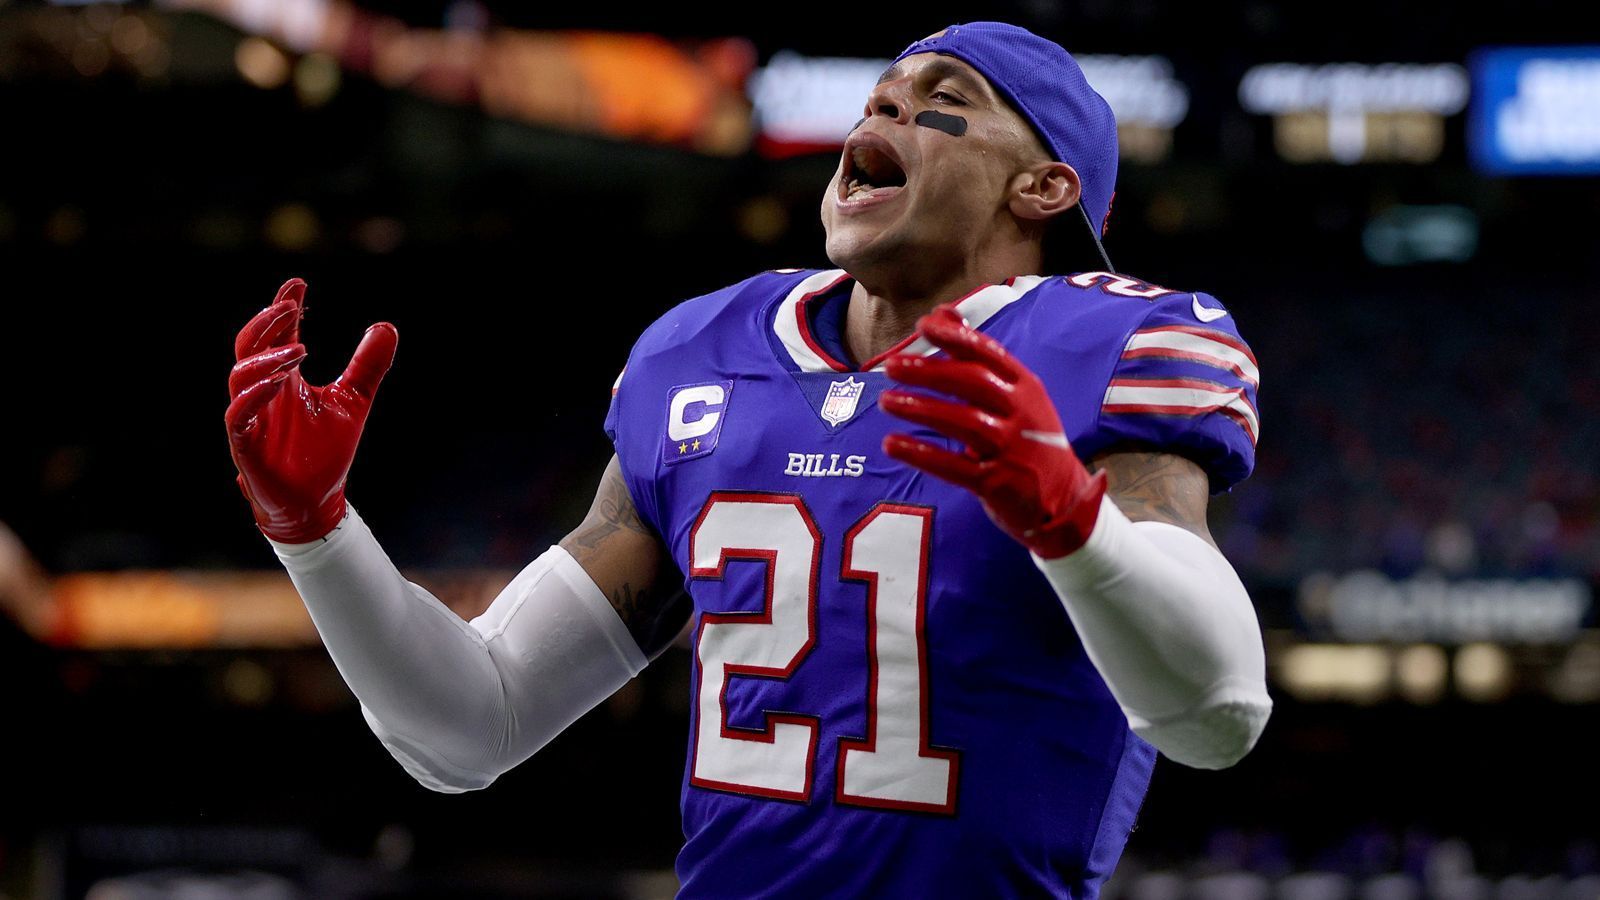 
                <strong>Platz 7 (geteilt): Jordan Poyer</strong><br>
                &#x2022; Team: Buffalo Bills<br>&#x2022; Position: Strong Safety<br>&#x2022; <strong>Overall Rating: 90</strong><br>&#x2022; Beste Key Stats: Zone Coverage: 94 - Stamina: 93 - Acceleration: 91<br>
              